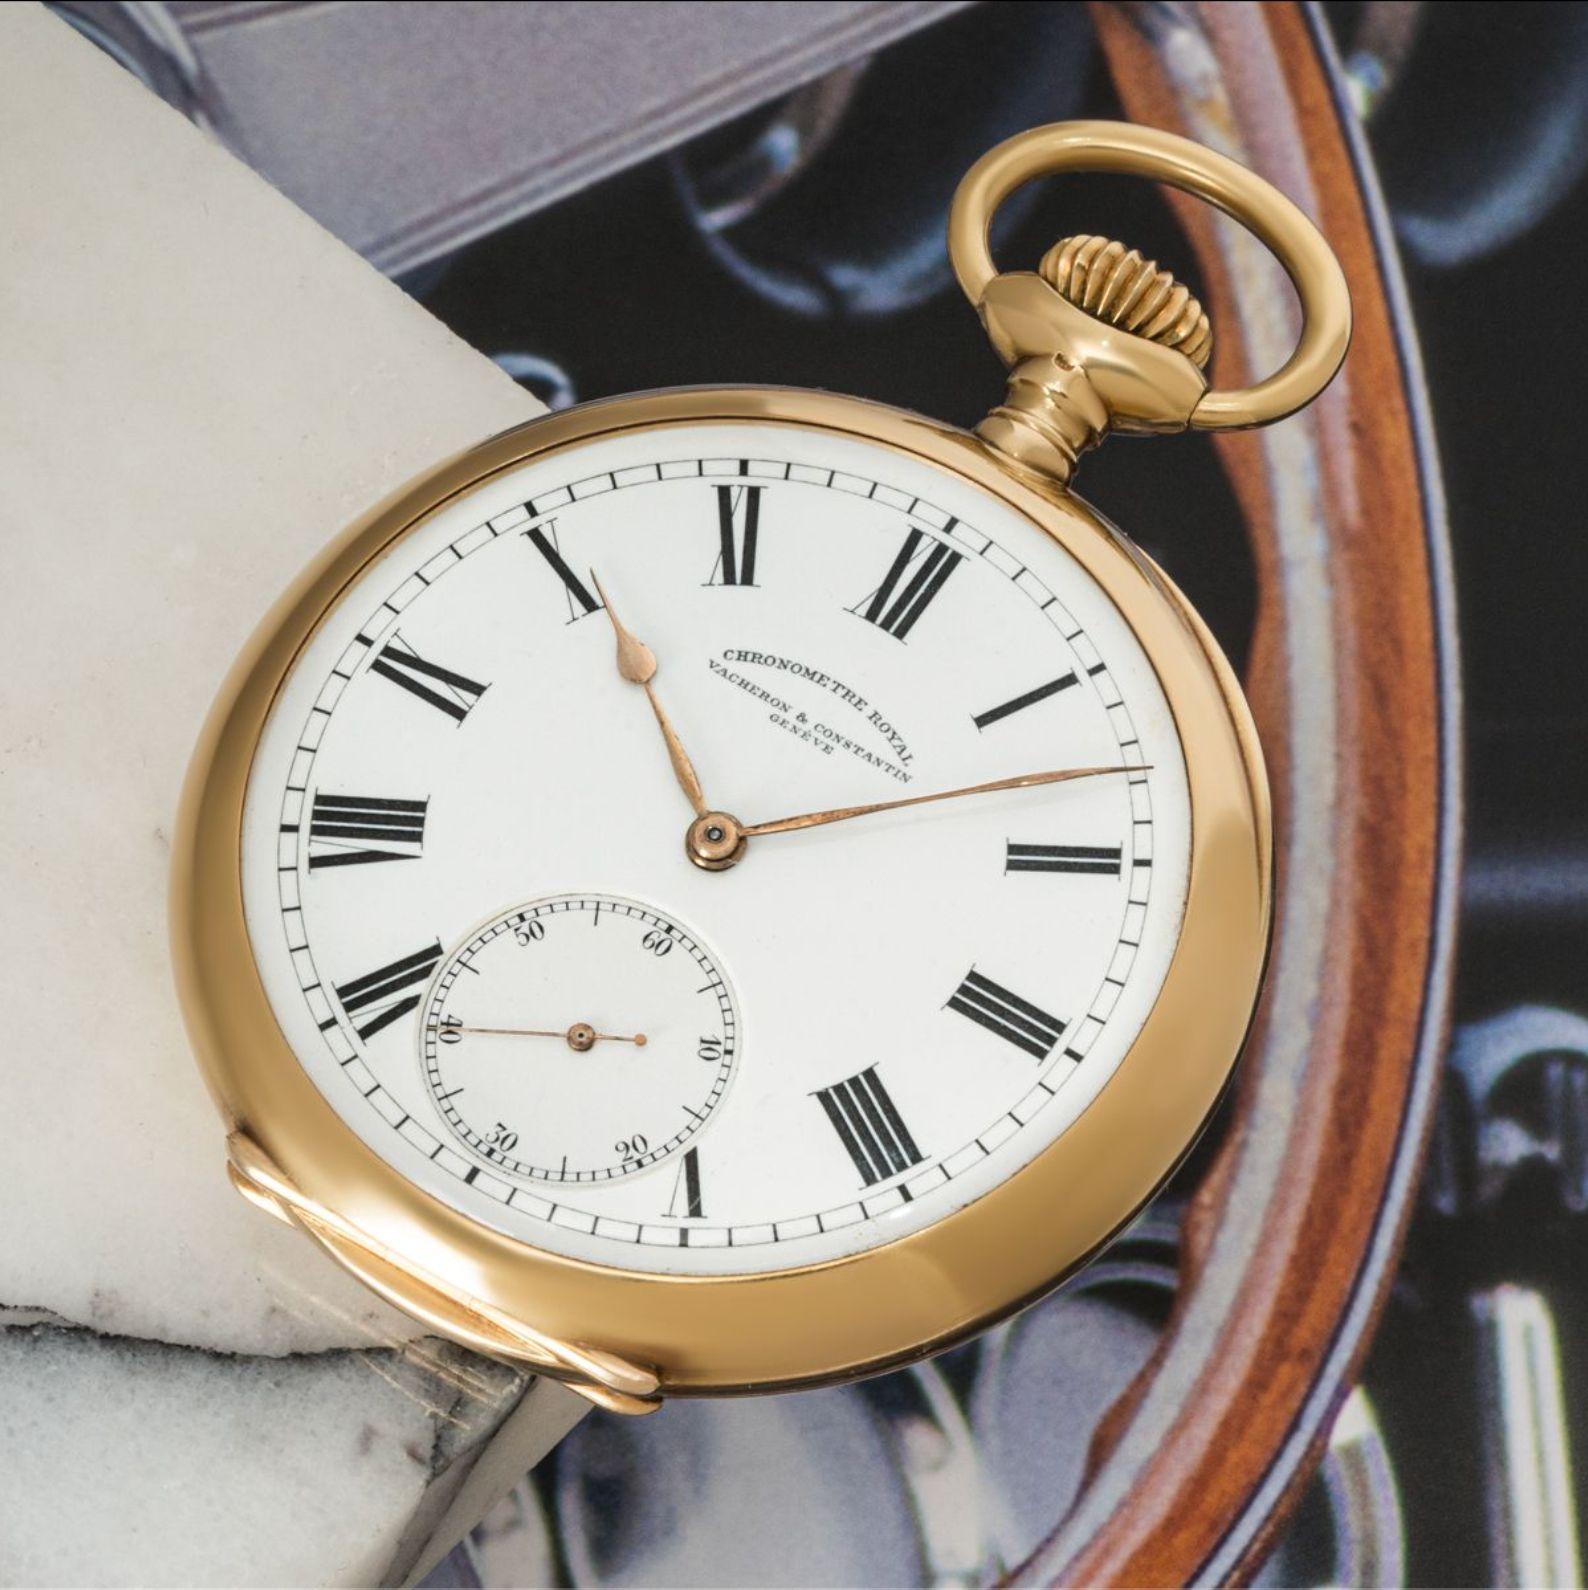 Vacheron Constantin Chronometer Royal Gold Open Face Pocket Watch C1910 In Excellent Condition For Sale In London, GB